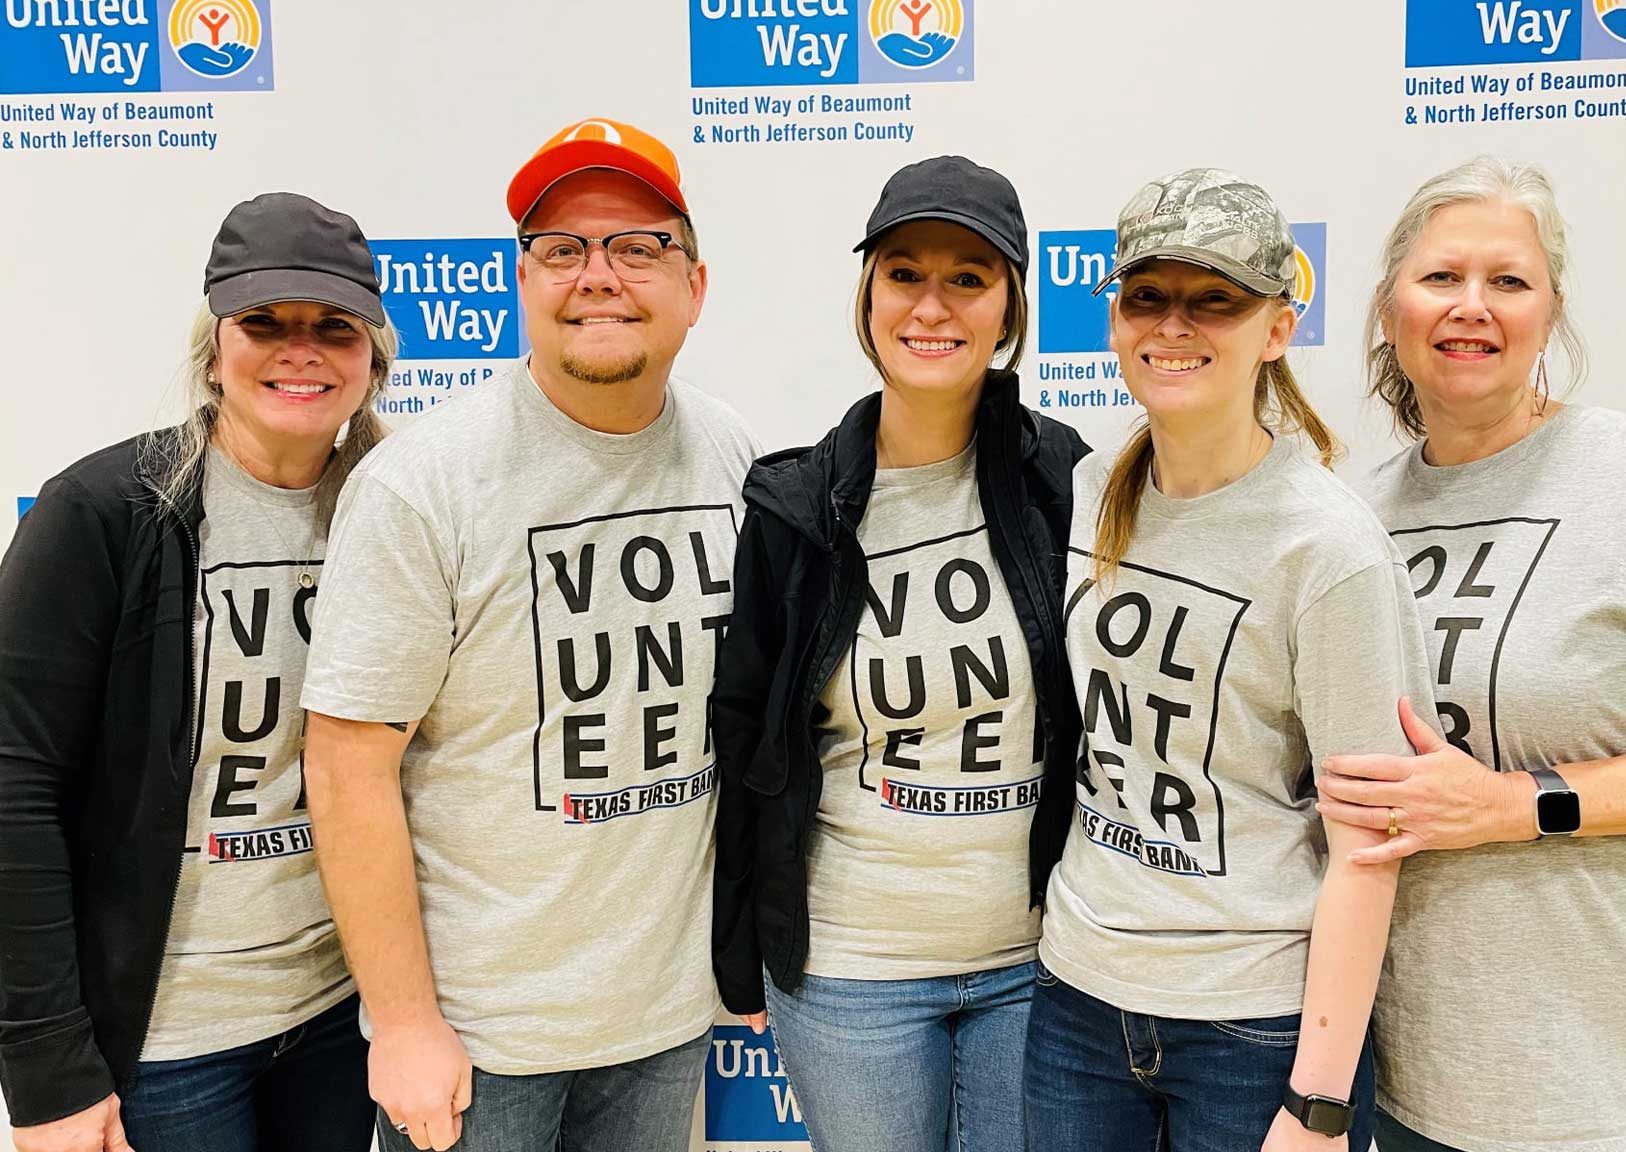 Texas First employees volunteering at an event